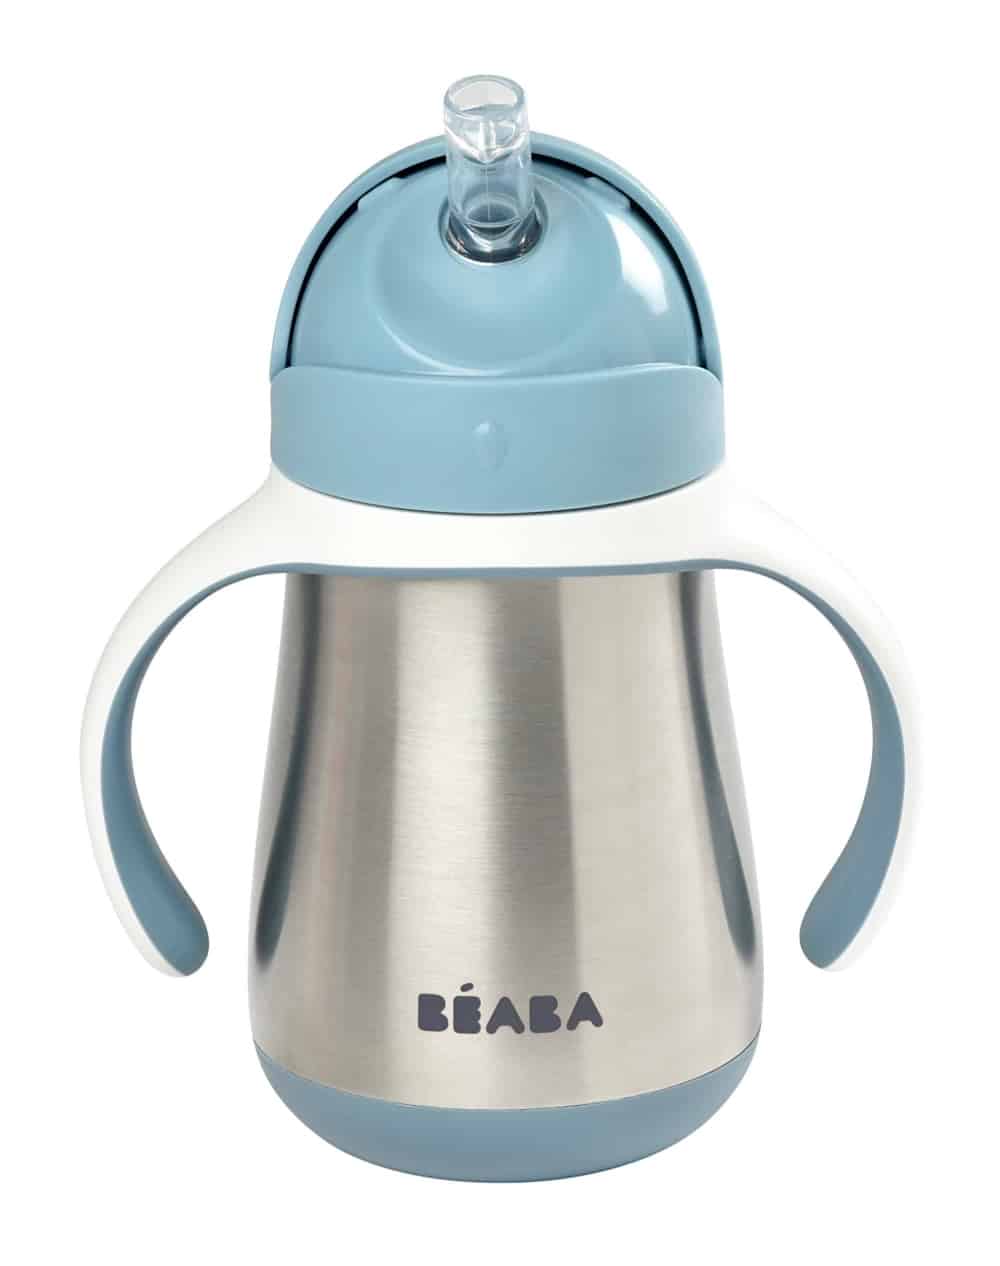 Beaba Stainless Steel Cup Rain Drinkware for Baby and Toddlers